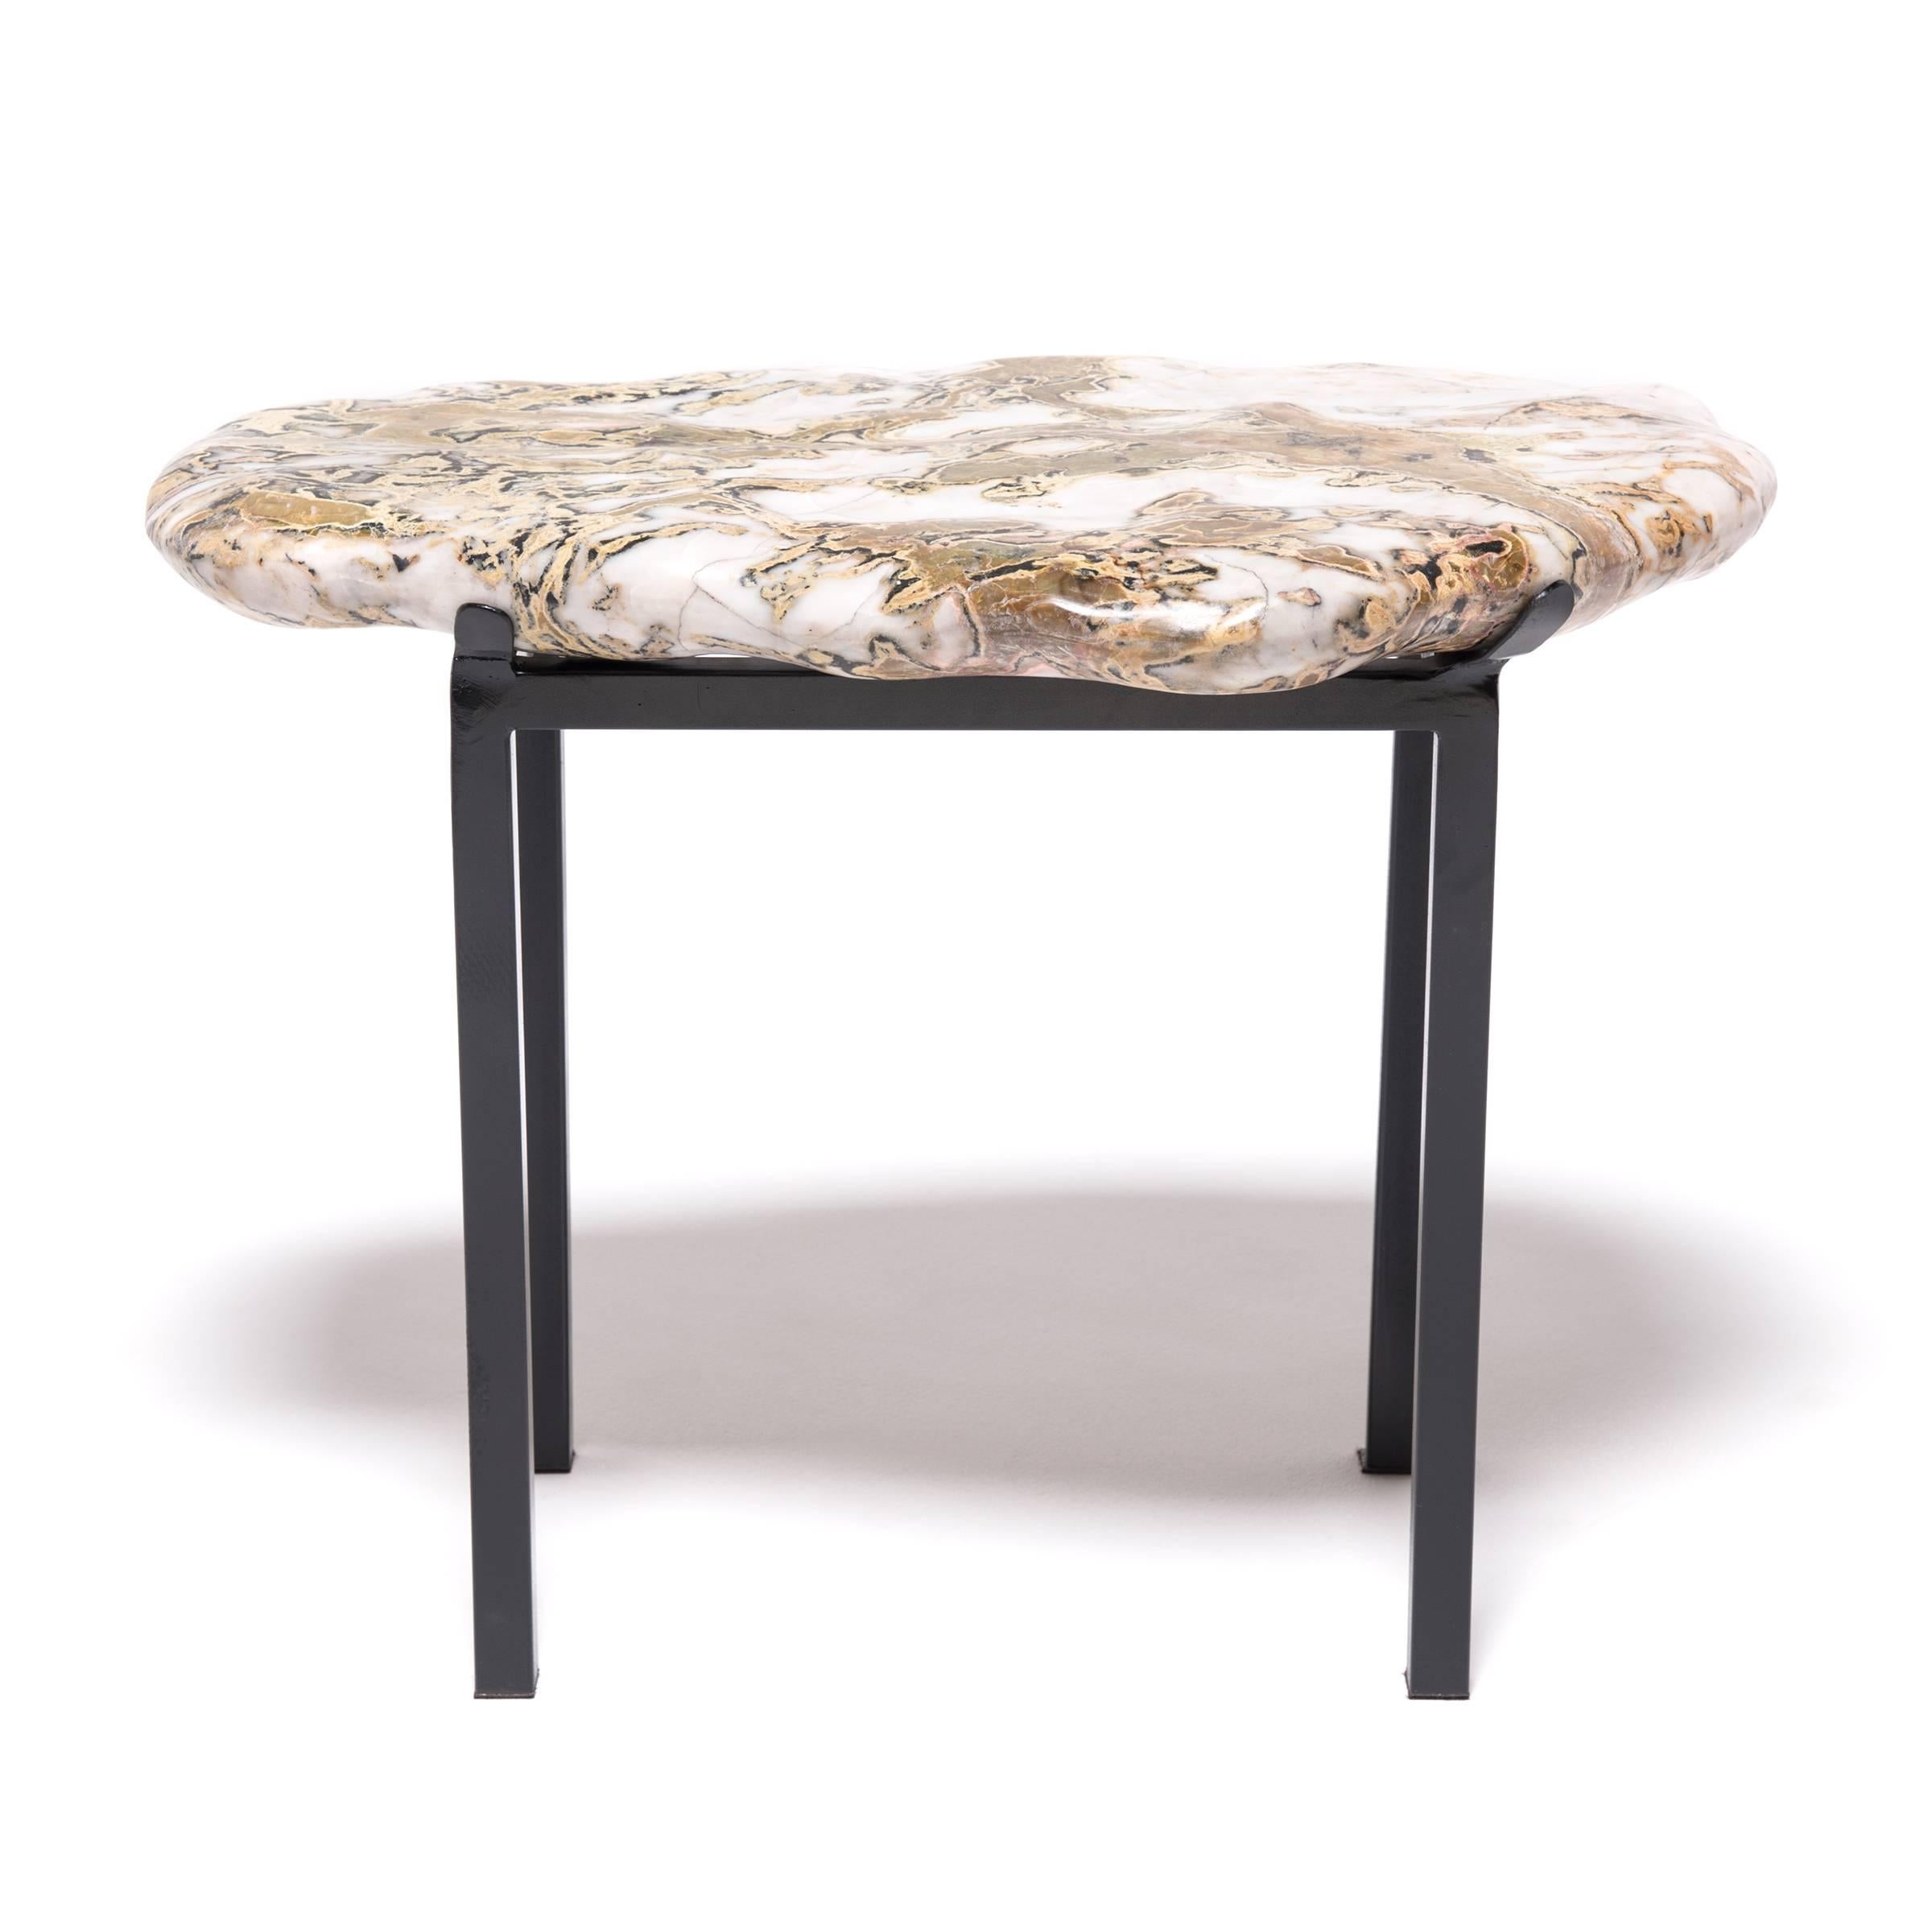 Contemporary Chinese Meditation Stone Table